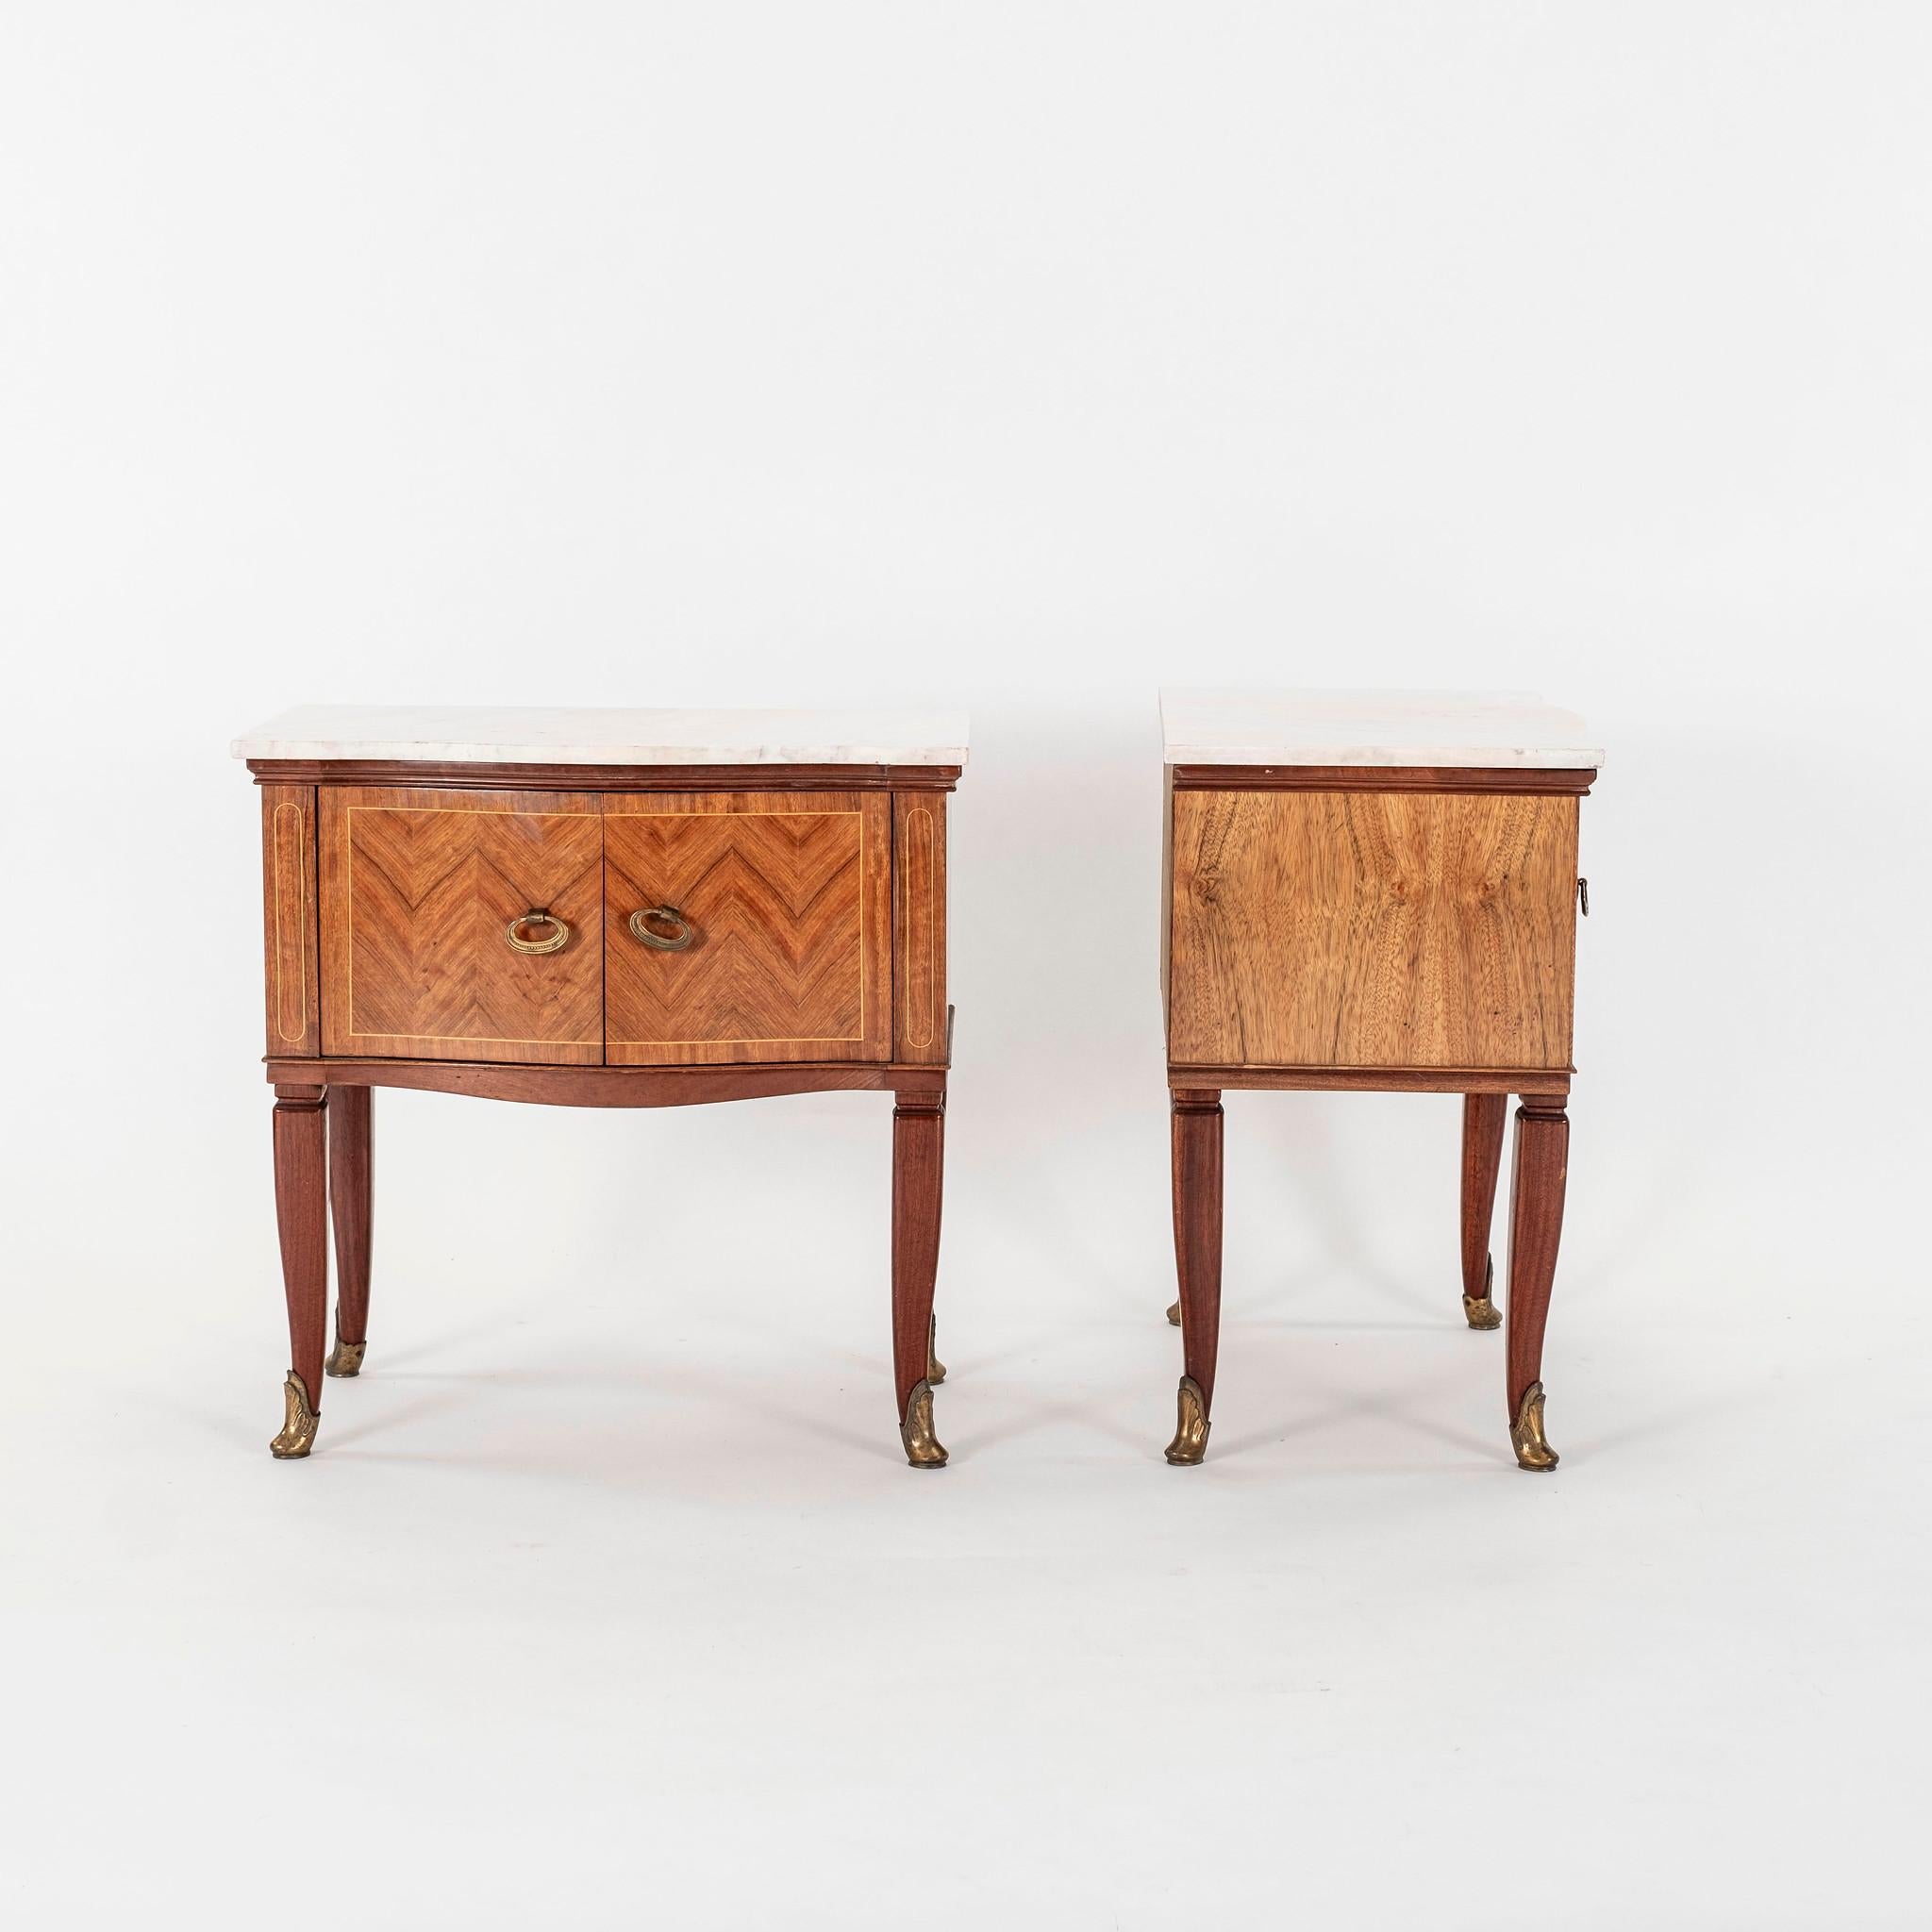 Pair of Italian mid century Paolo Buffa style nightstands. Two door chevron marquetry cabinets with bronze sabots and marble tops.